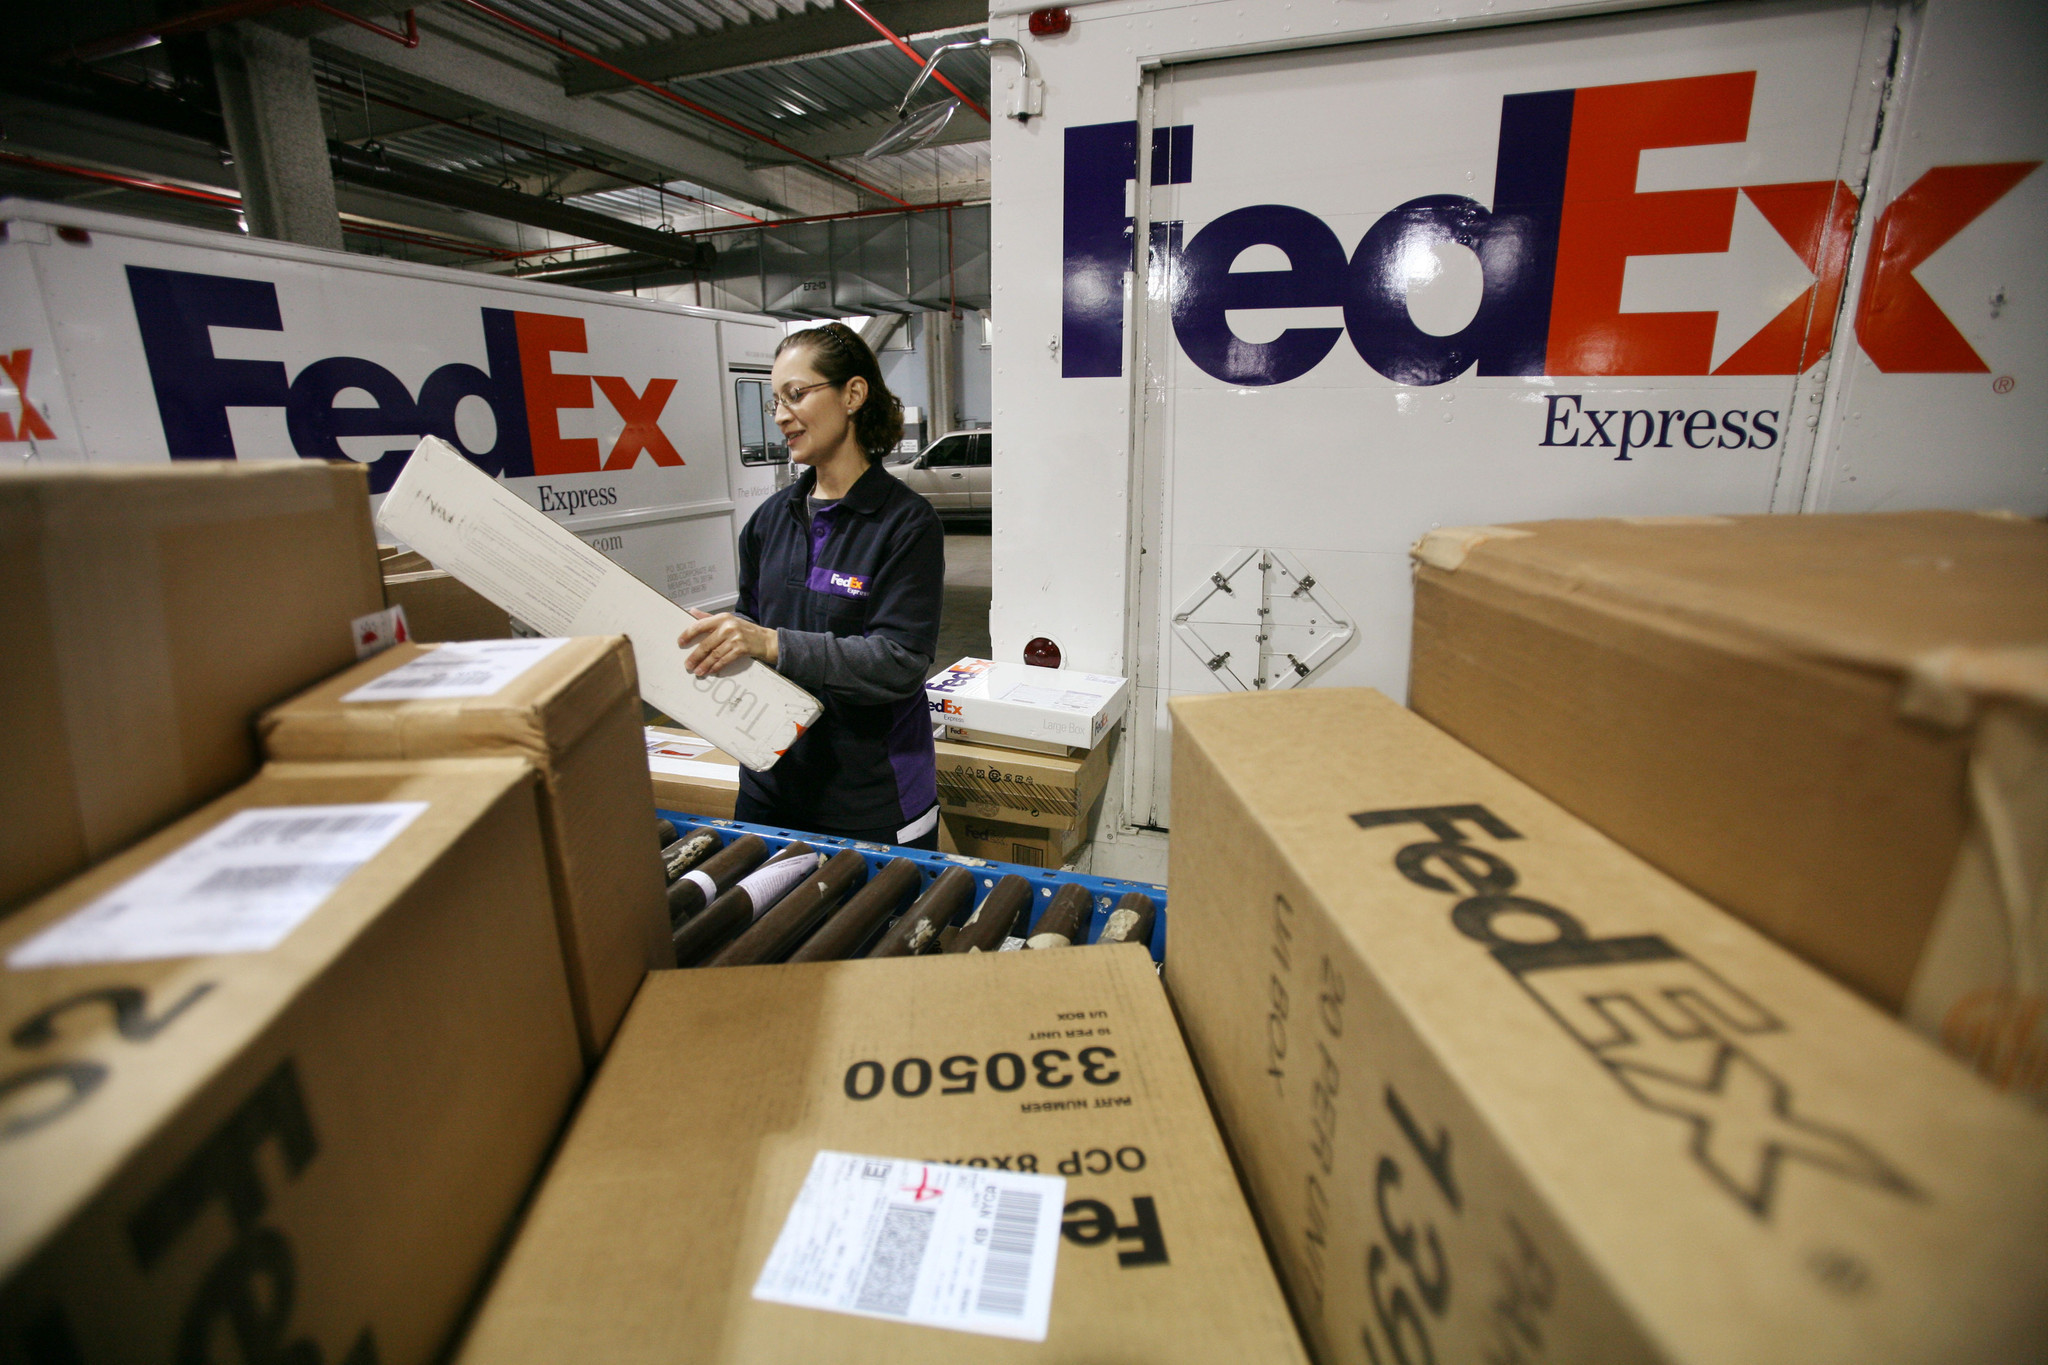 Your oversize orders are giving FedEx a big delivery 